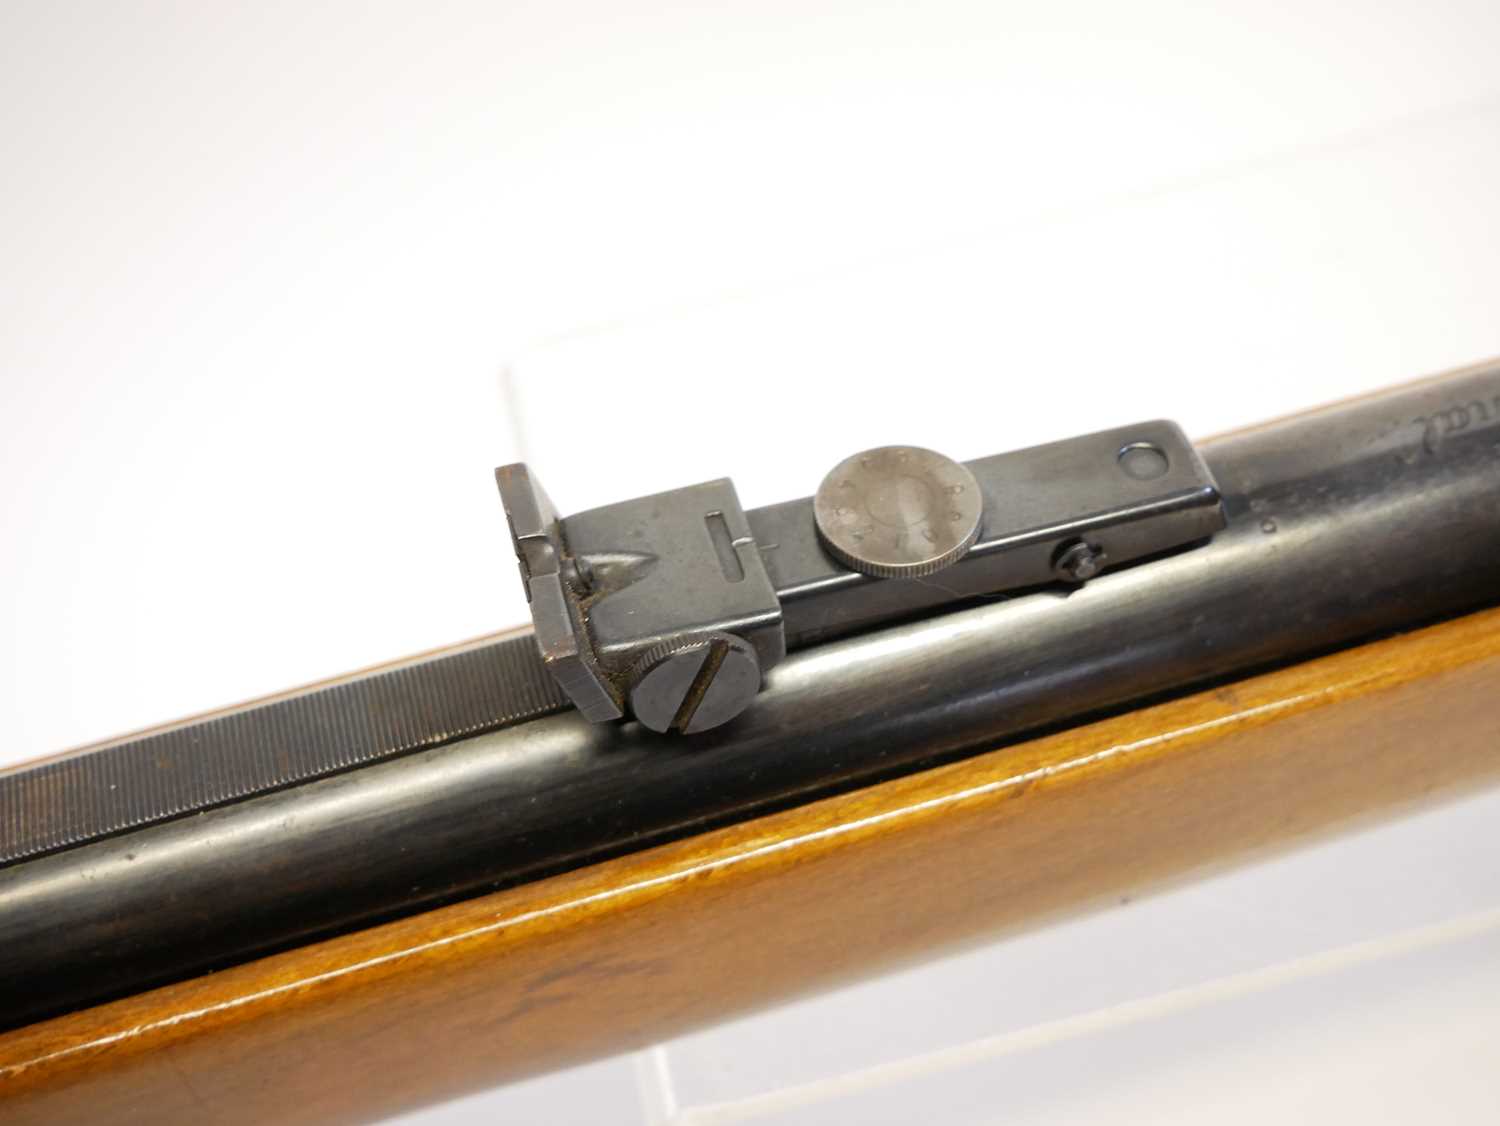 Original model 50 .22 air rifle, serial number 71371623, 18.5 inch barrel with tunnel front sight - Image 5 of 13